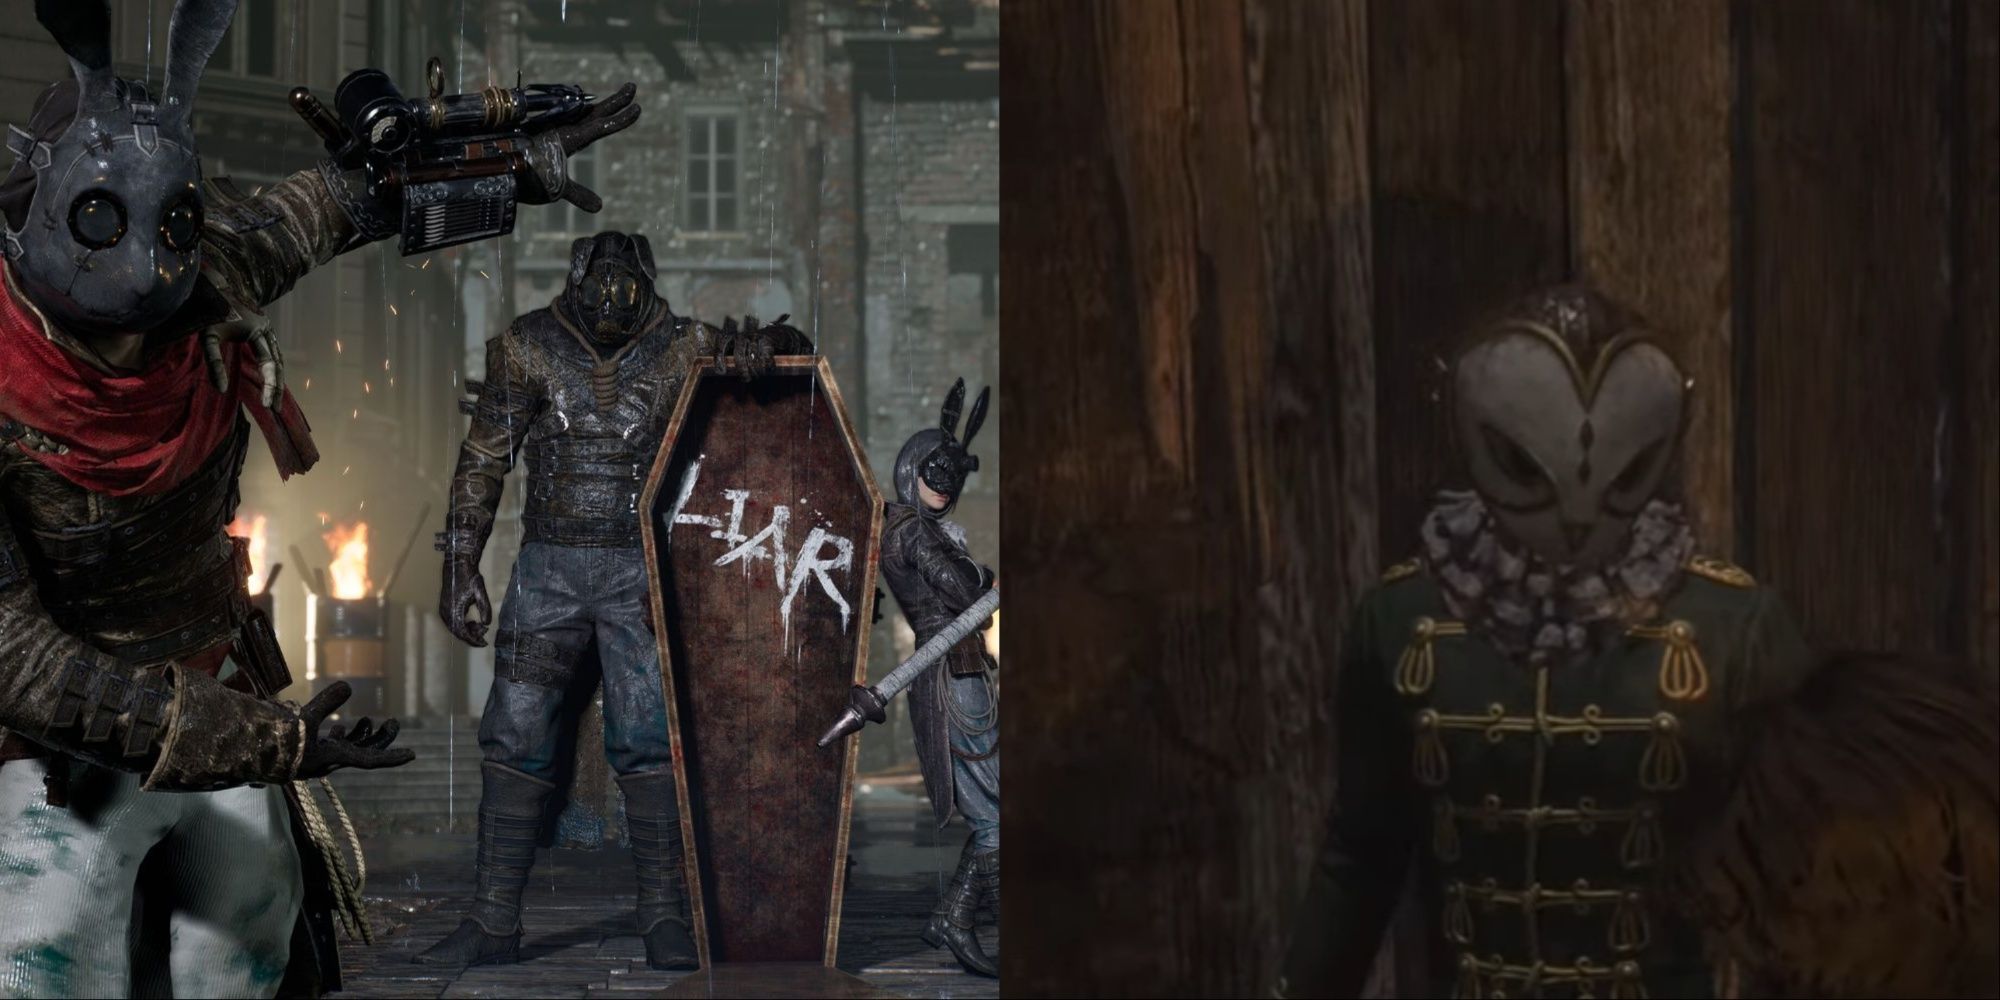 Split-image of the Black Rabbit Brotherhood characters' intro scene, and Pinocchio conversing with the Owl Doctor before the boss fights.